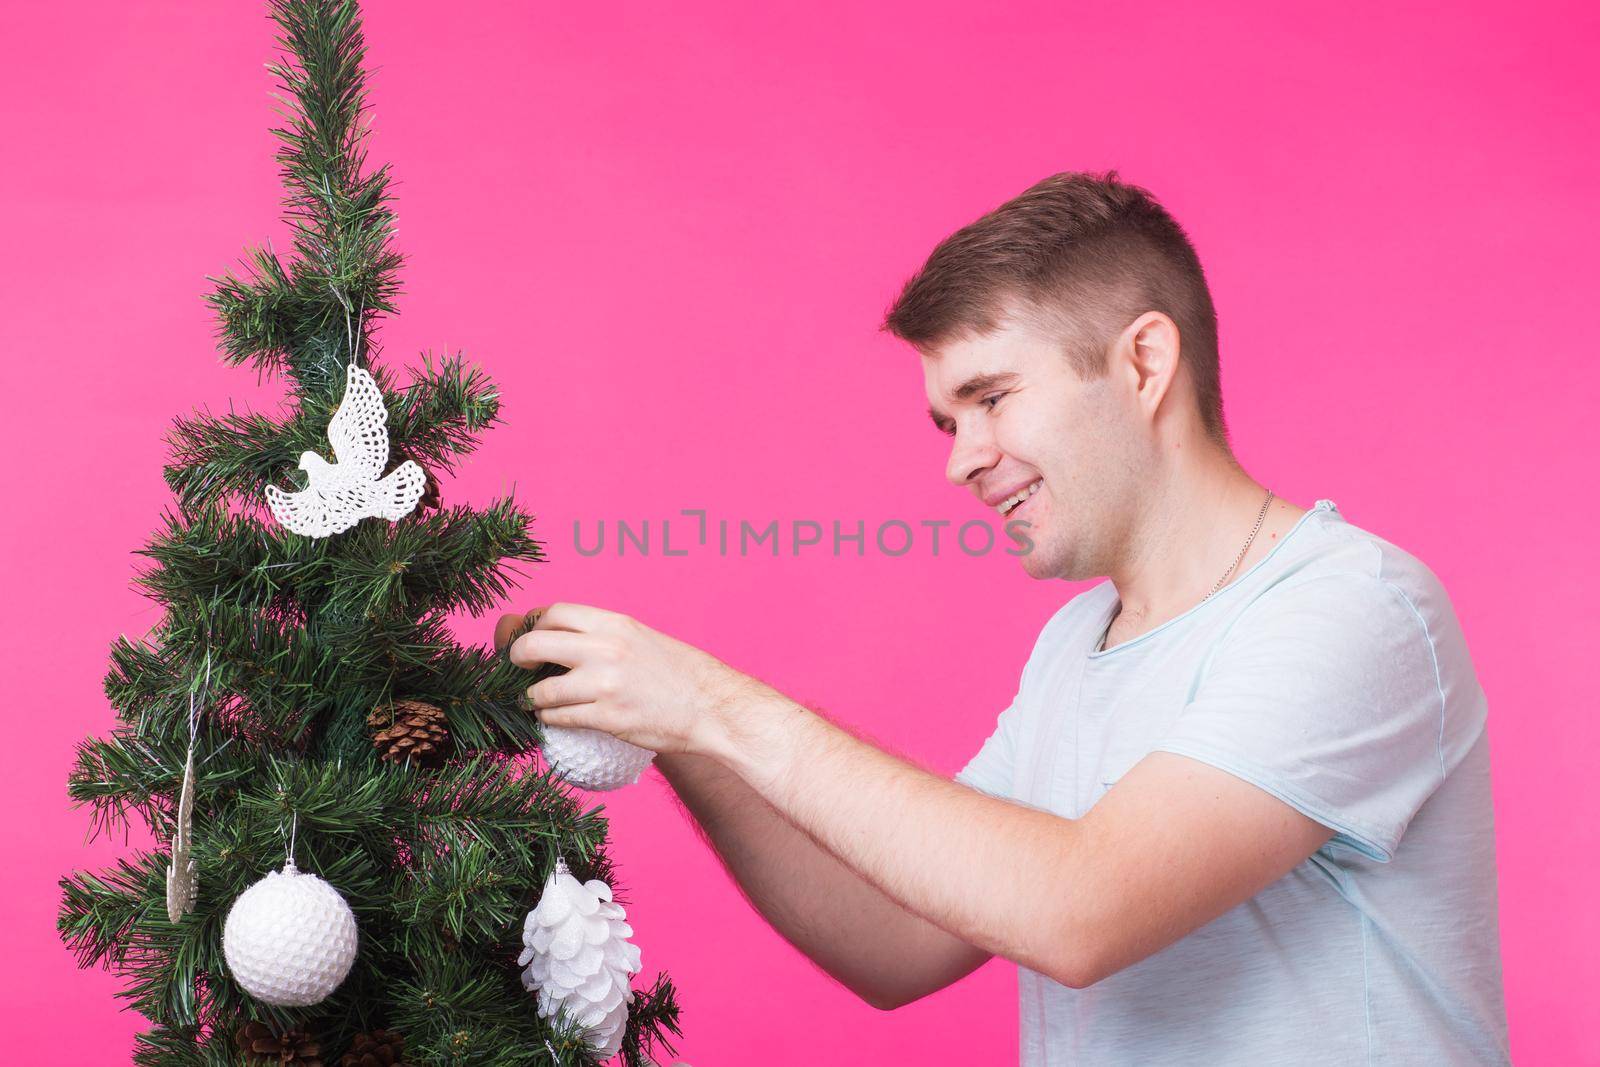 People, holidays and christmas concept - young man decorating christmas tree on pink background.